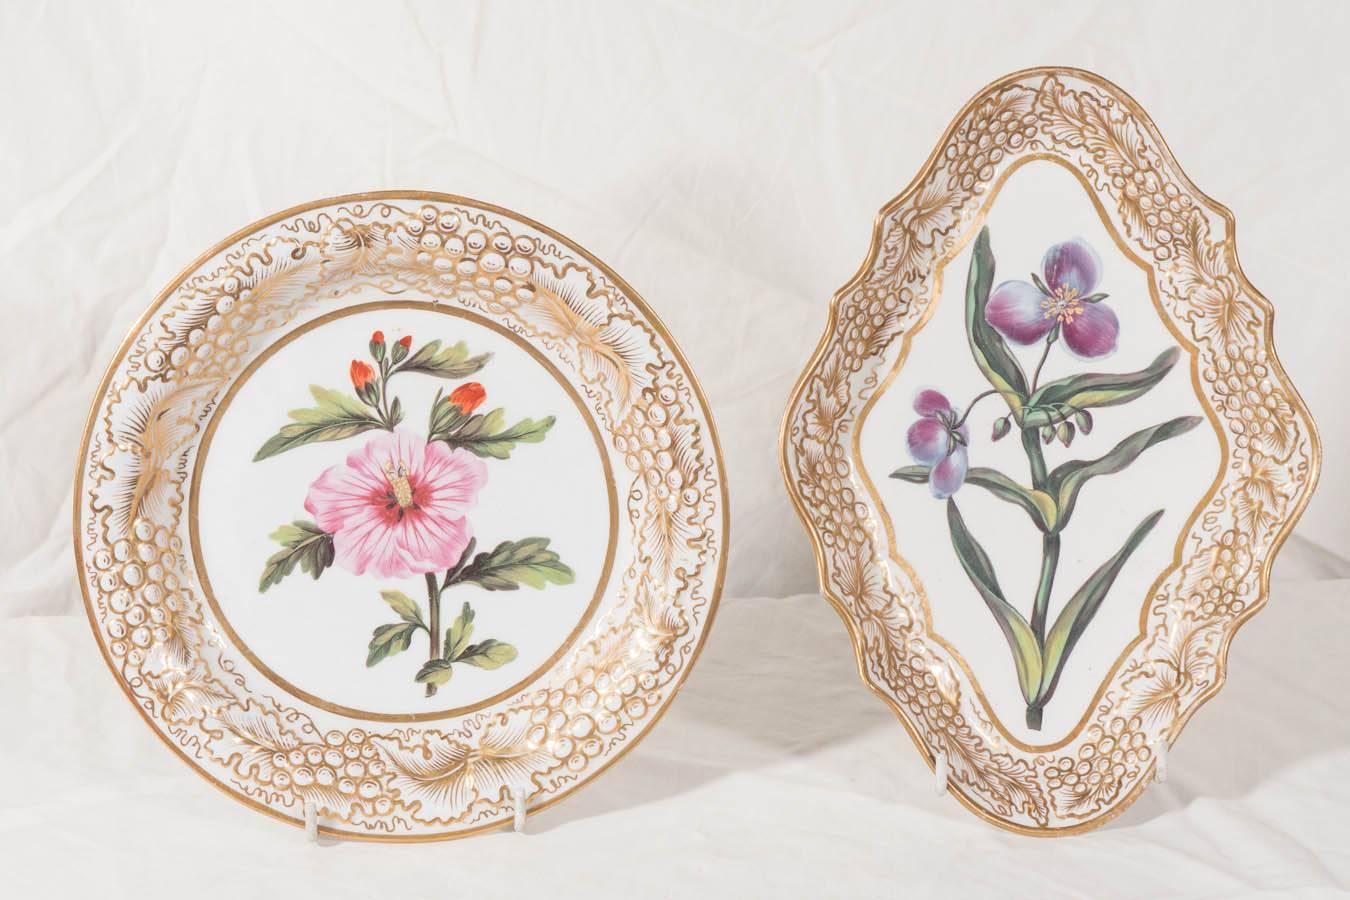  Antique English Porcelain Service in a Style Similar to the Danish Flora Danica 3